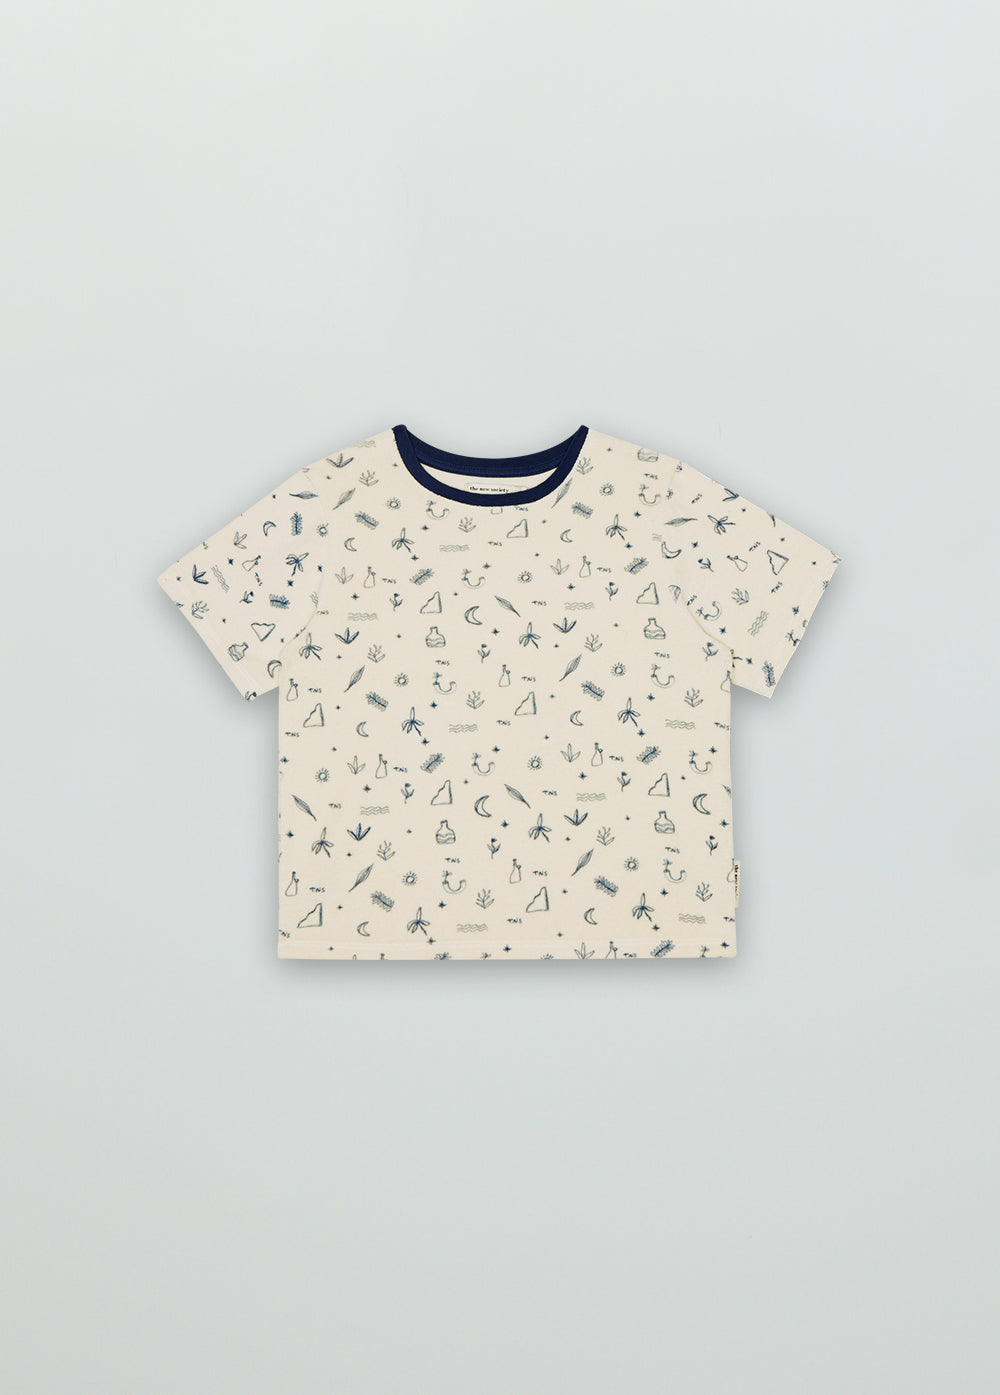 Francis Tee All the things print